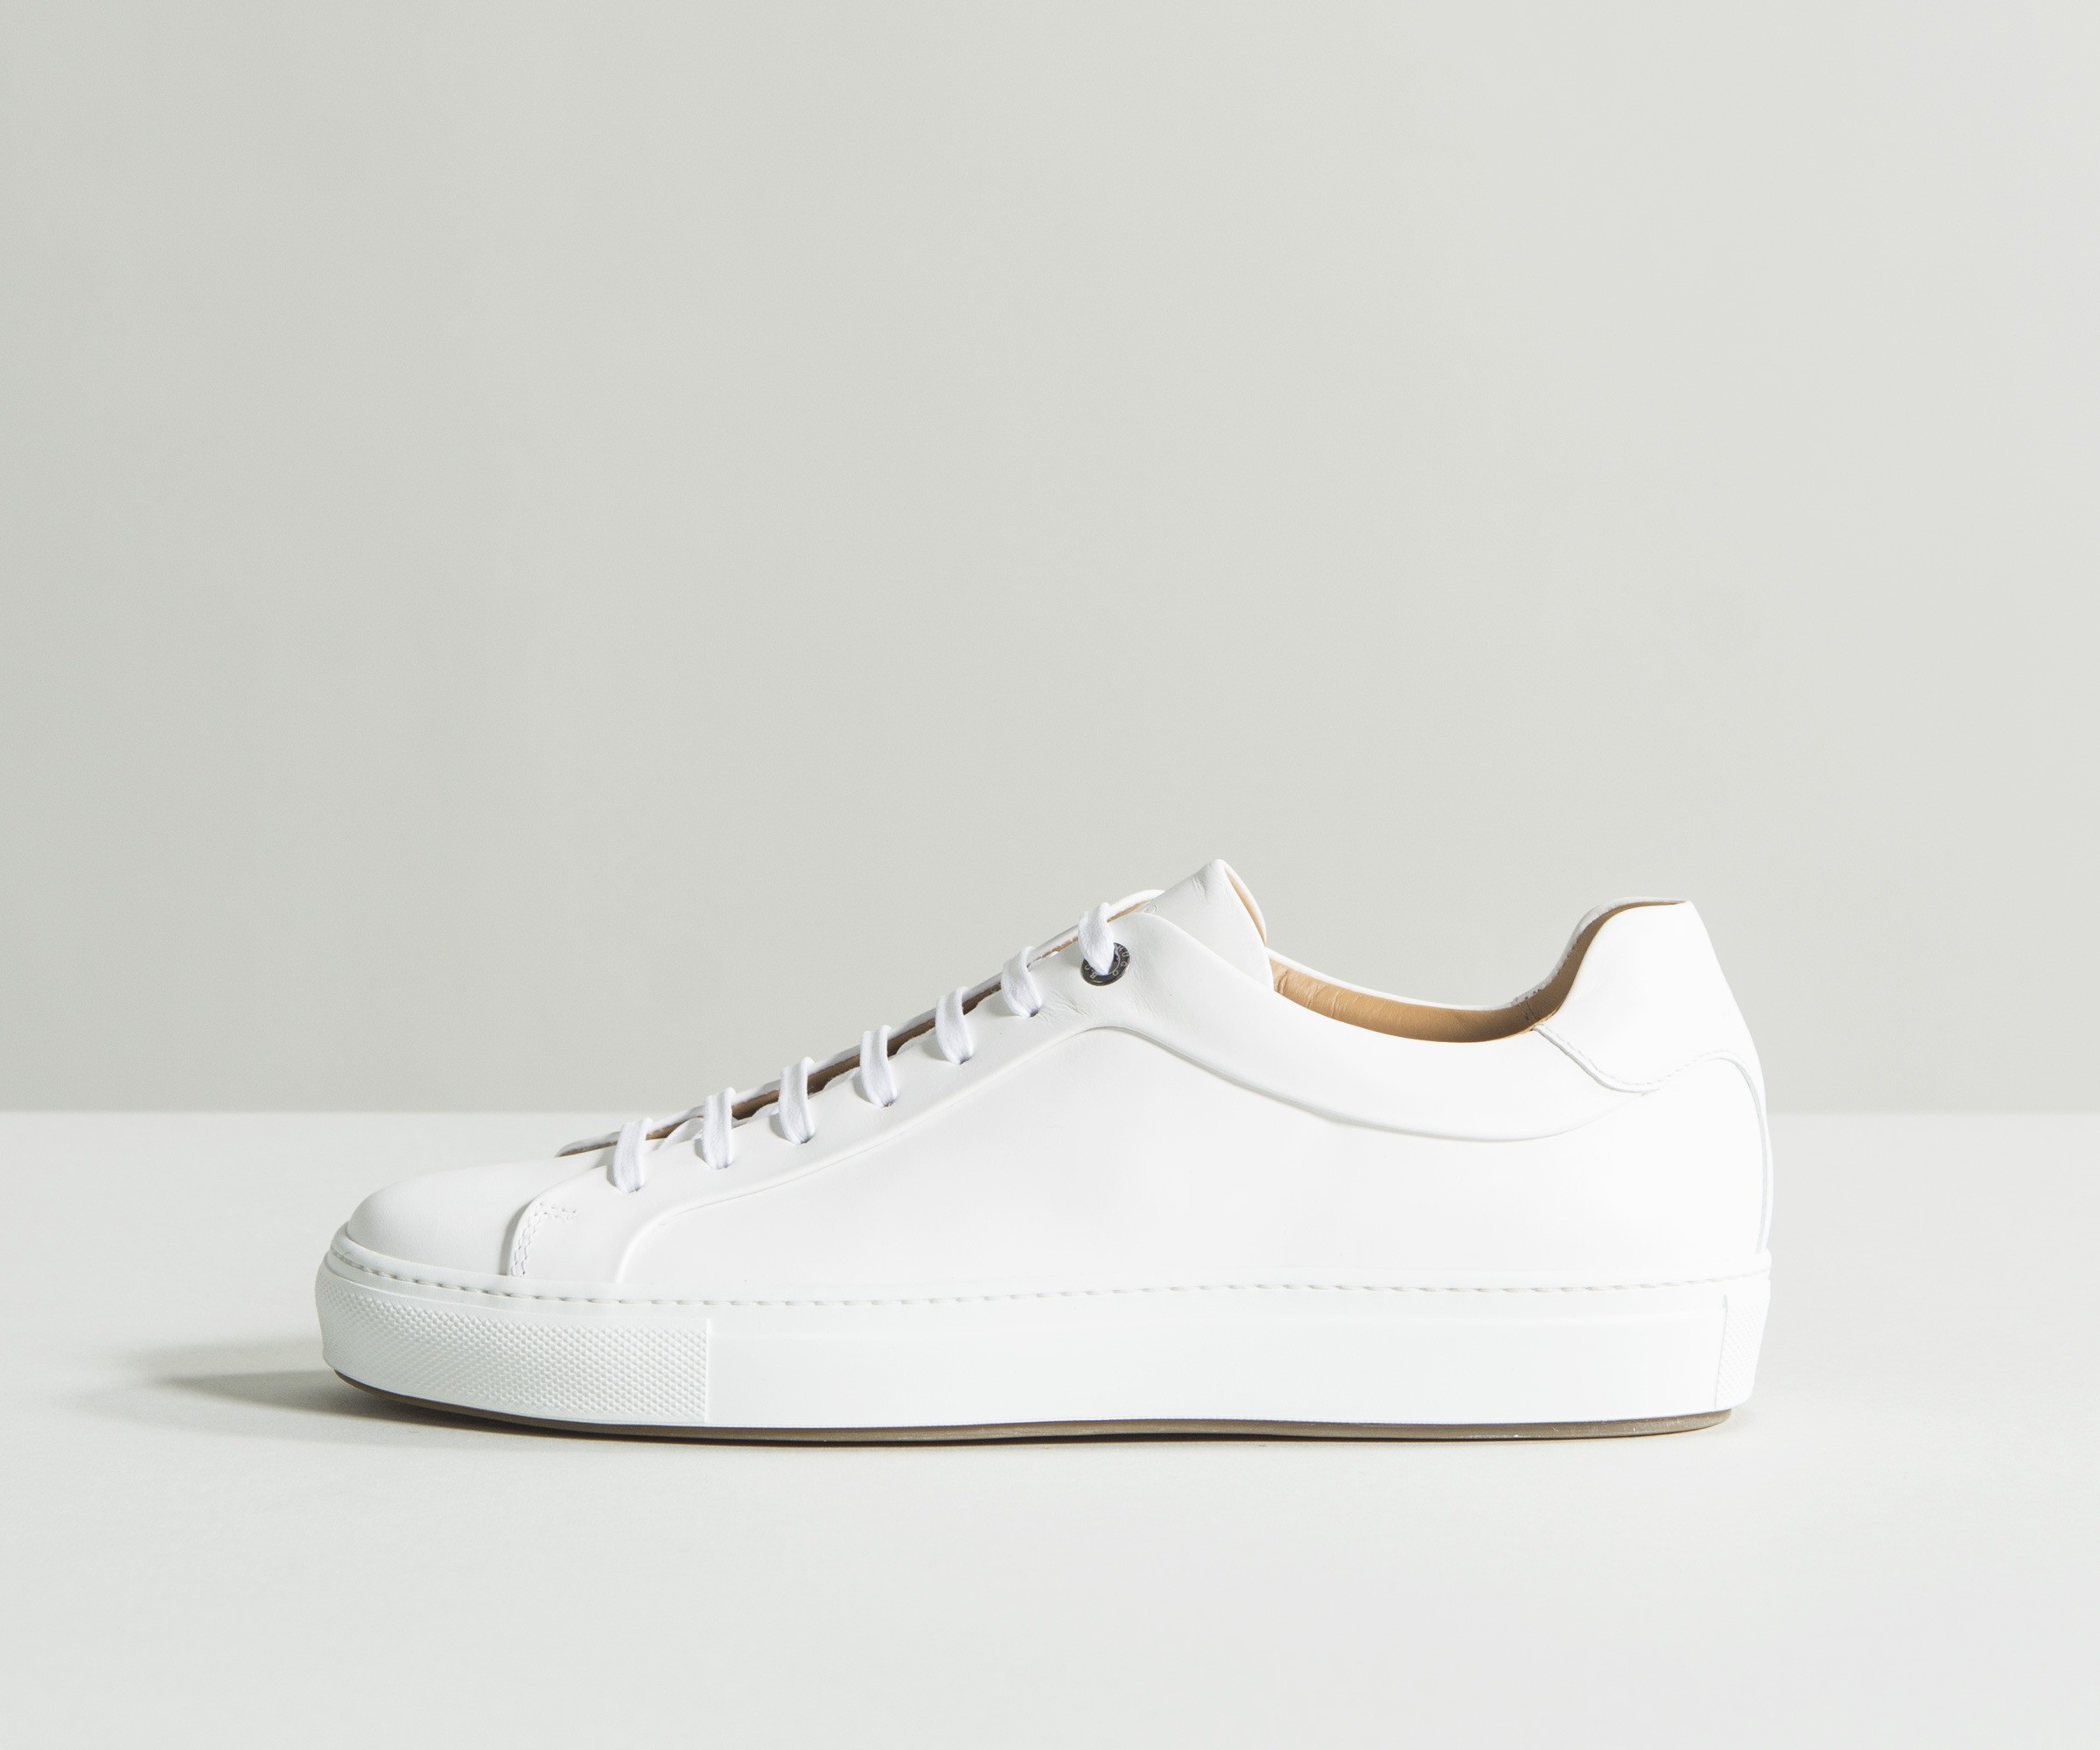 Hugo Boss 'Mirage_Tenn' Tennis-Style Burnished Leather Trainers White